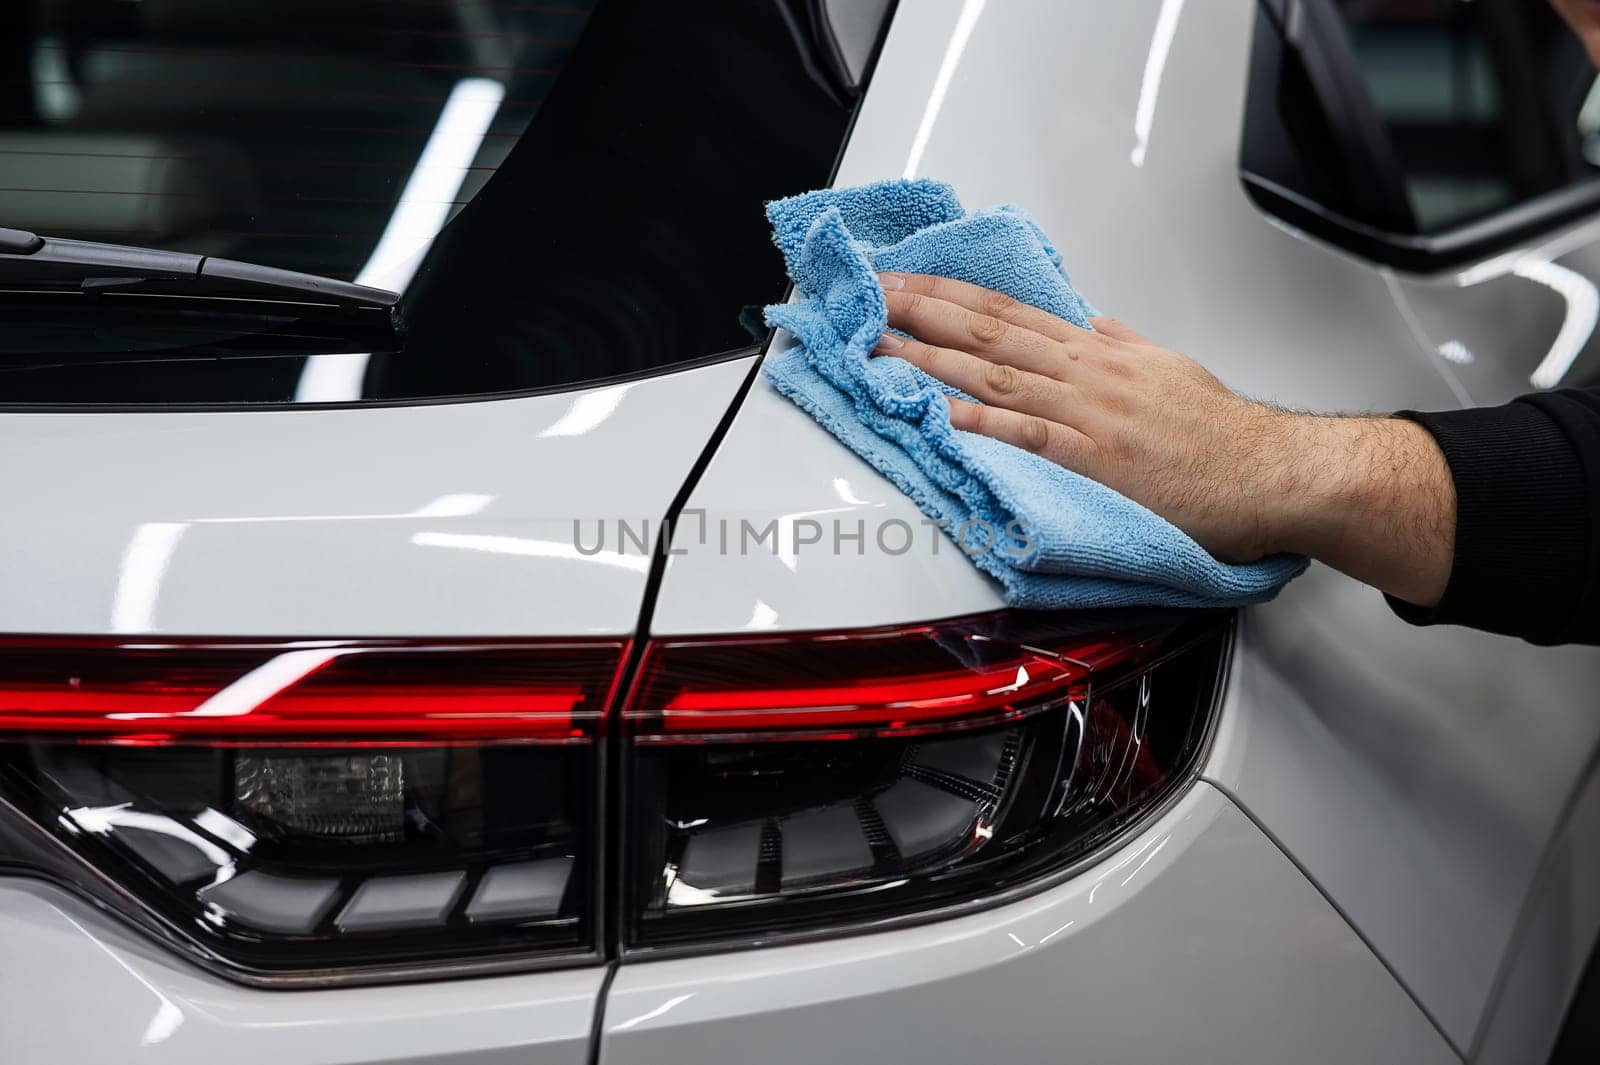 A mechanic wipes the body of a white car with a microfiber cloth. by mrwed54